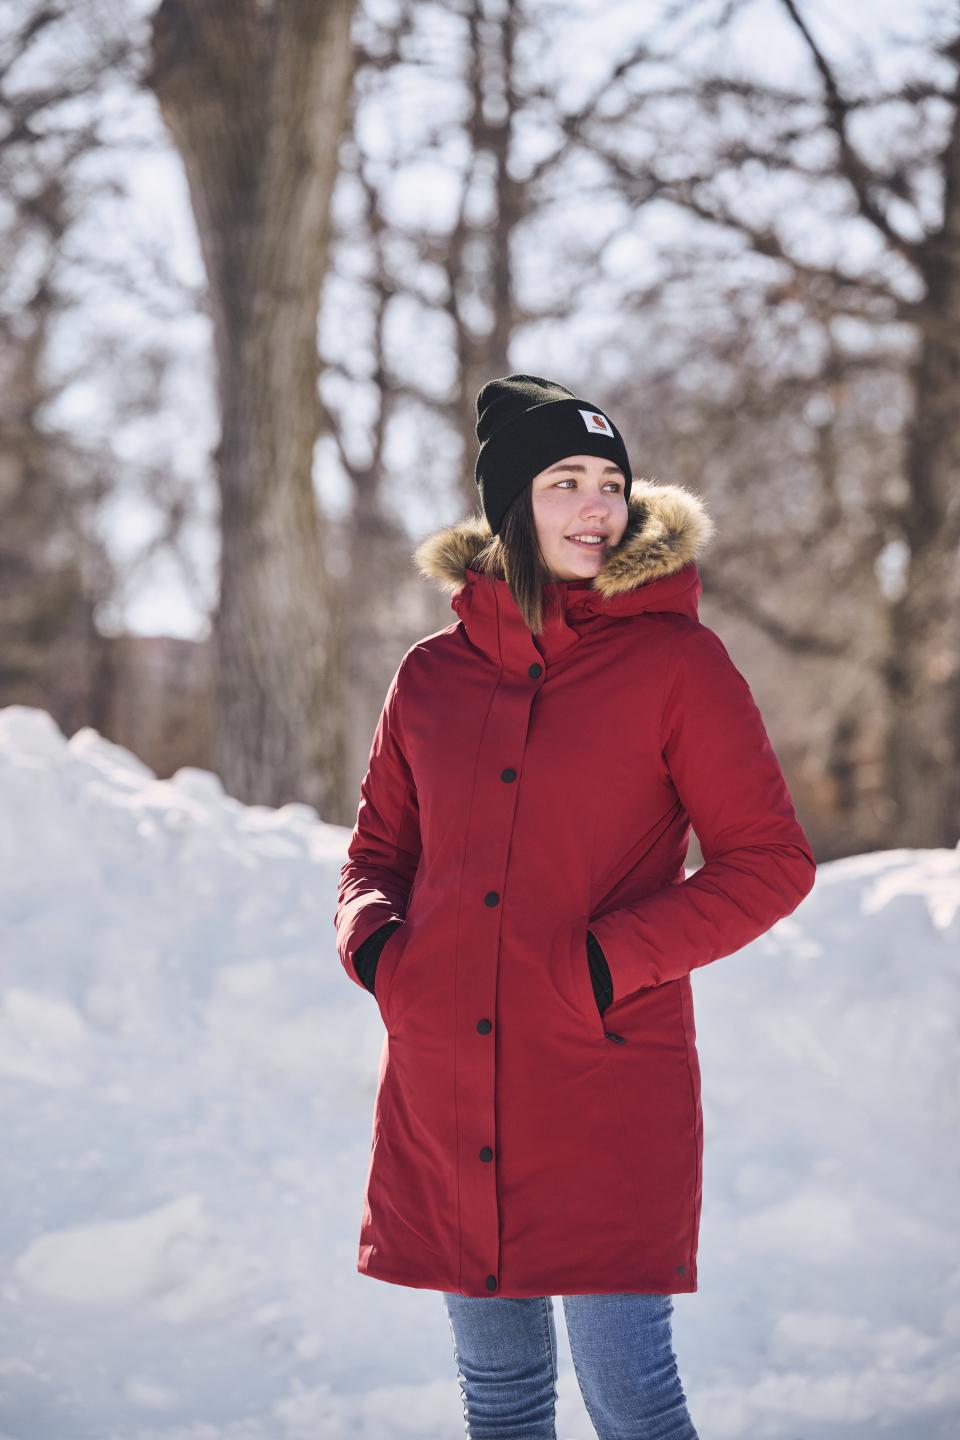 A woman in a winter parka and toque from Mark's stands next to a snowbank looking off in the distance